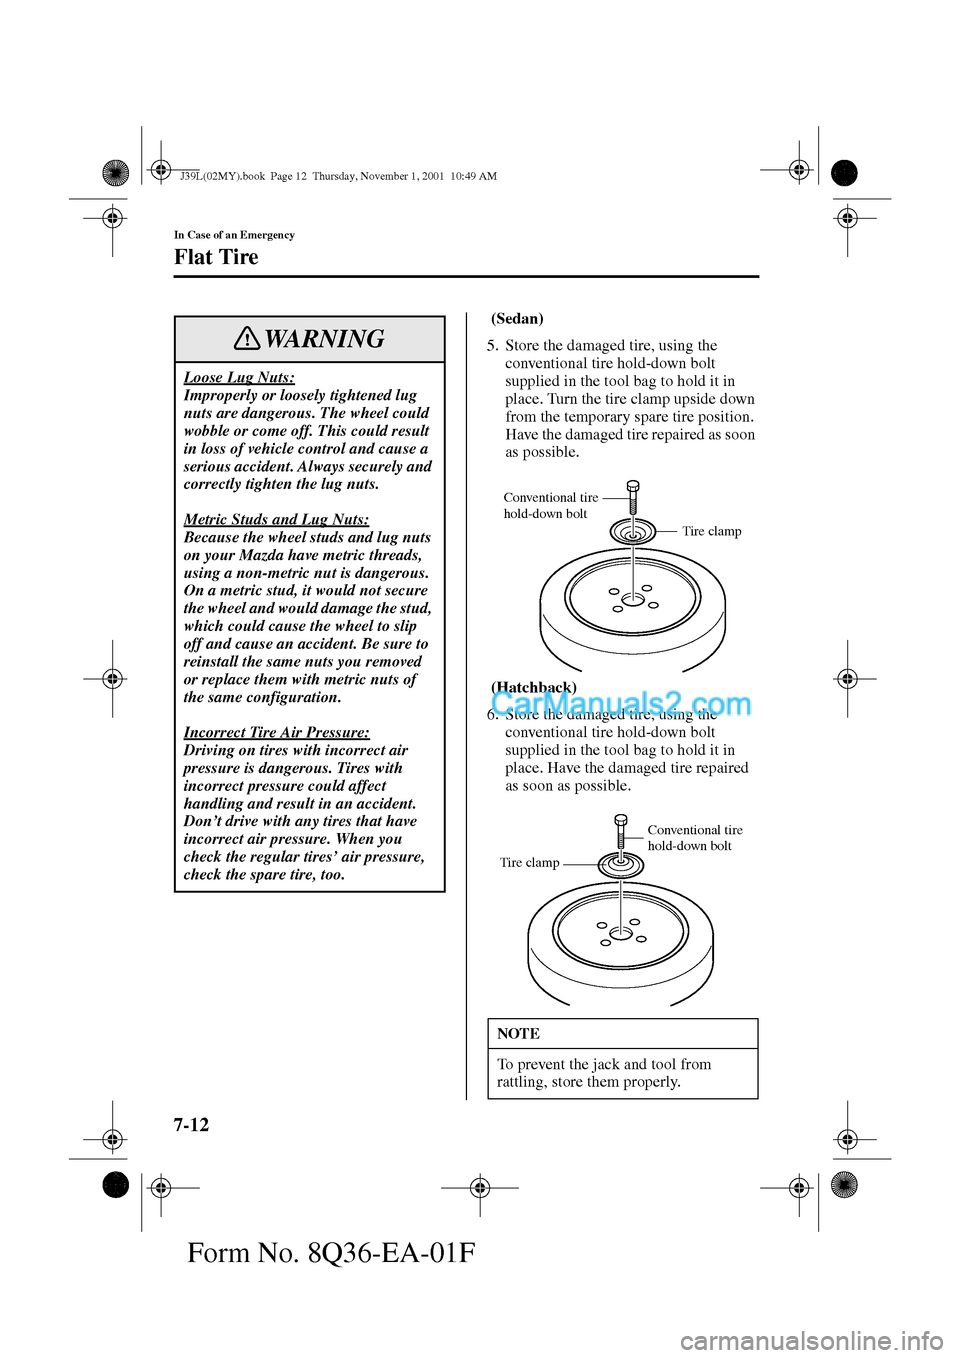 MAZDA MODEL PROTÉGÉ 2002  Owners Manual (in English) 7-12
In Case of an Emergency
Flat Tire
Form No. 8Q36-EA-01F
 (Sedan) 
5. Store the damaged tire, using the 
conventional tire hold-down bolt 
supplied in the tool bag to hold it in 
place. Turn the ti